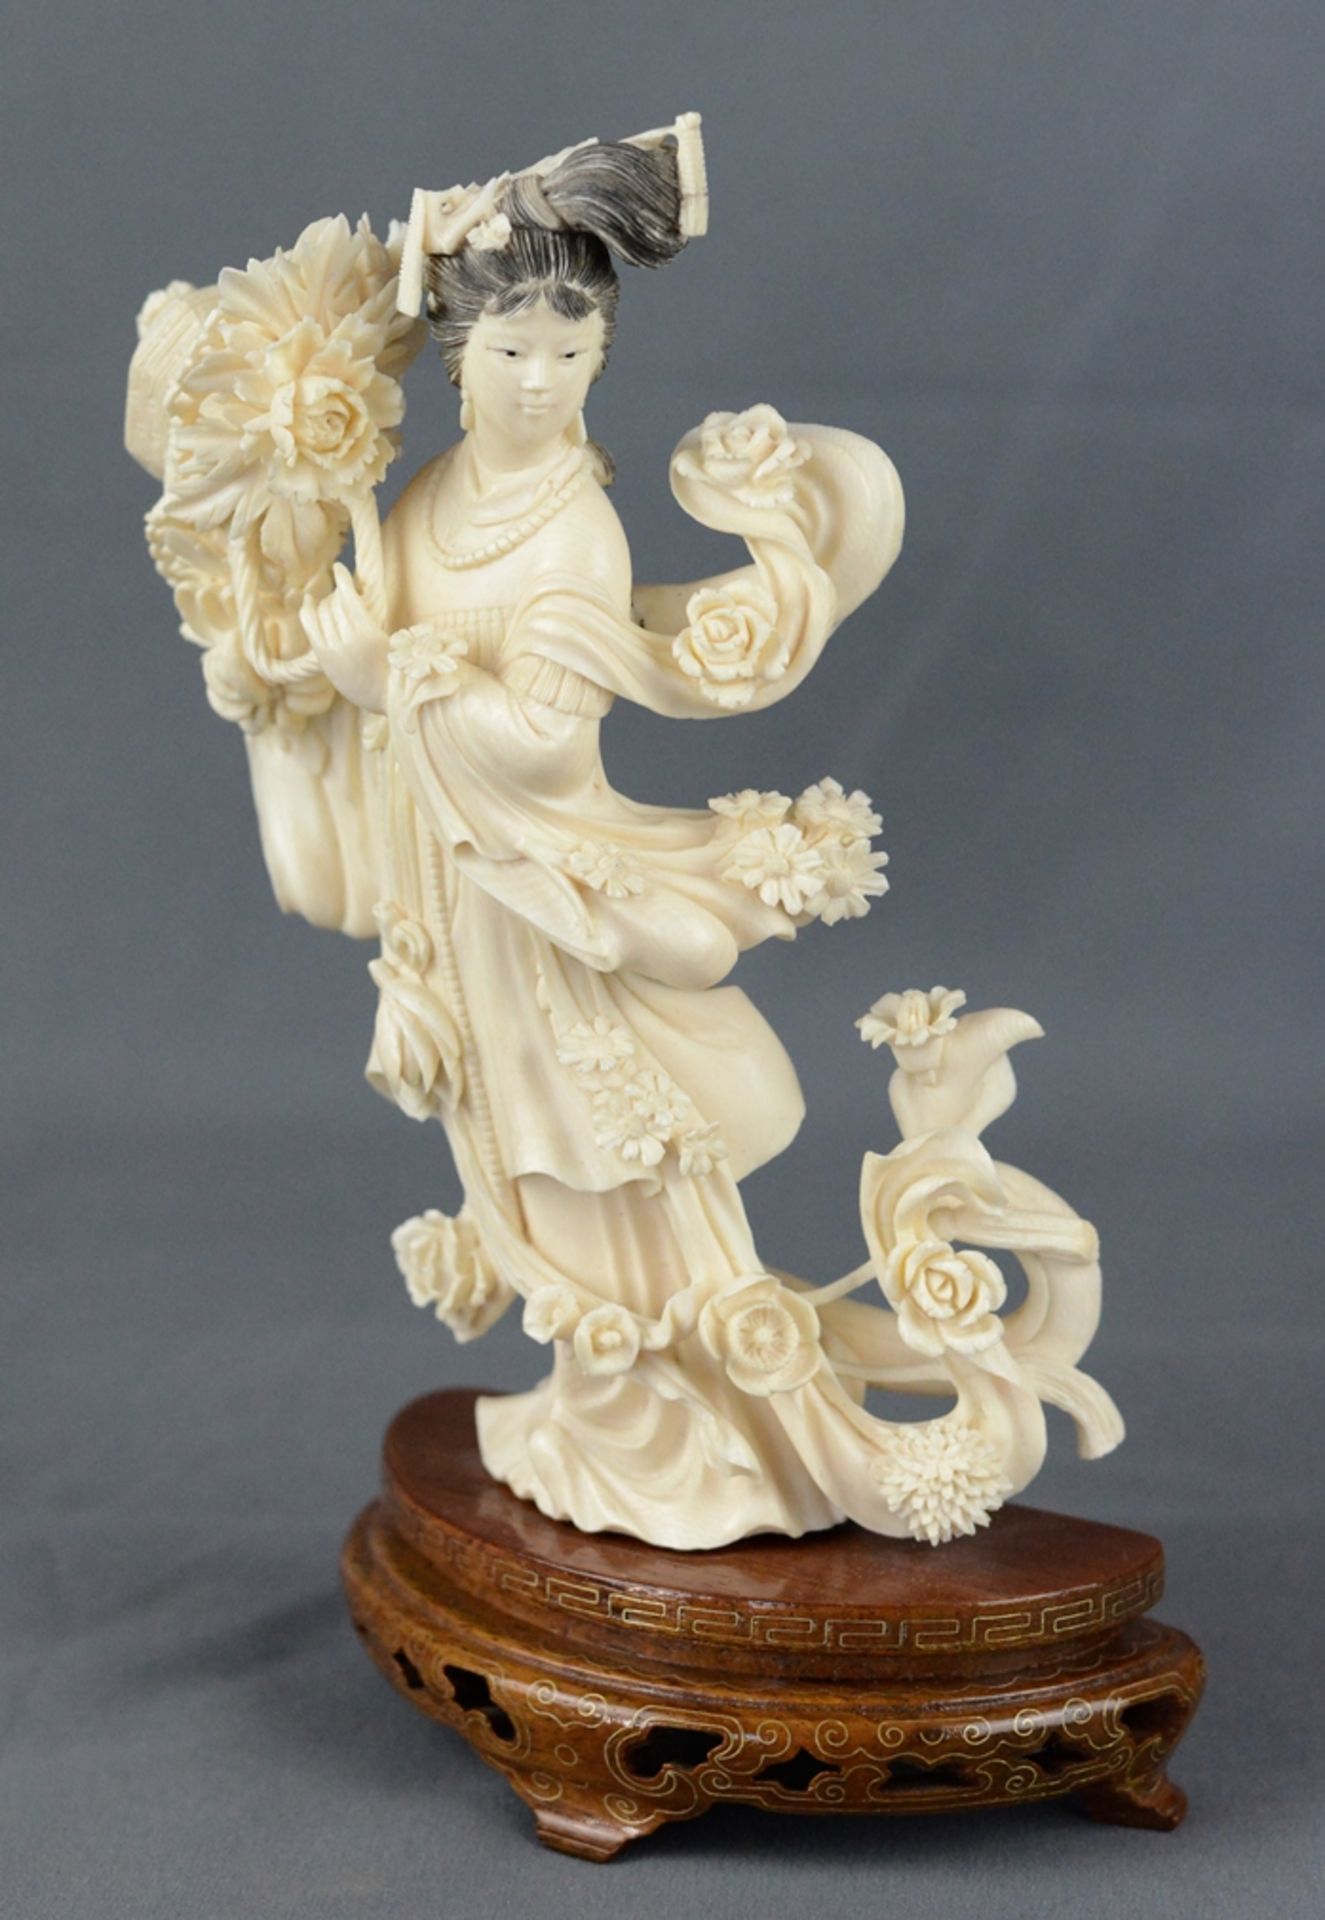 Guanyin figure, standing female figure, holding the a basket of peonies in her hands, richly decora